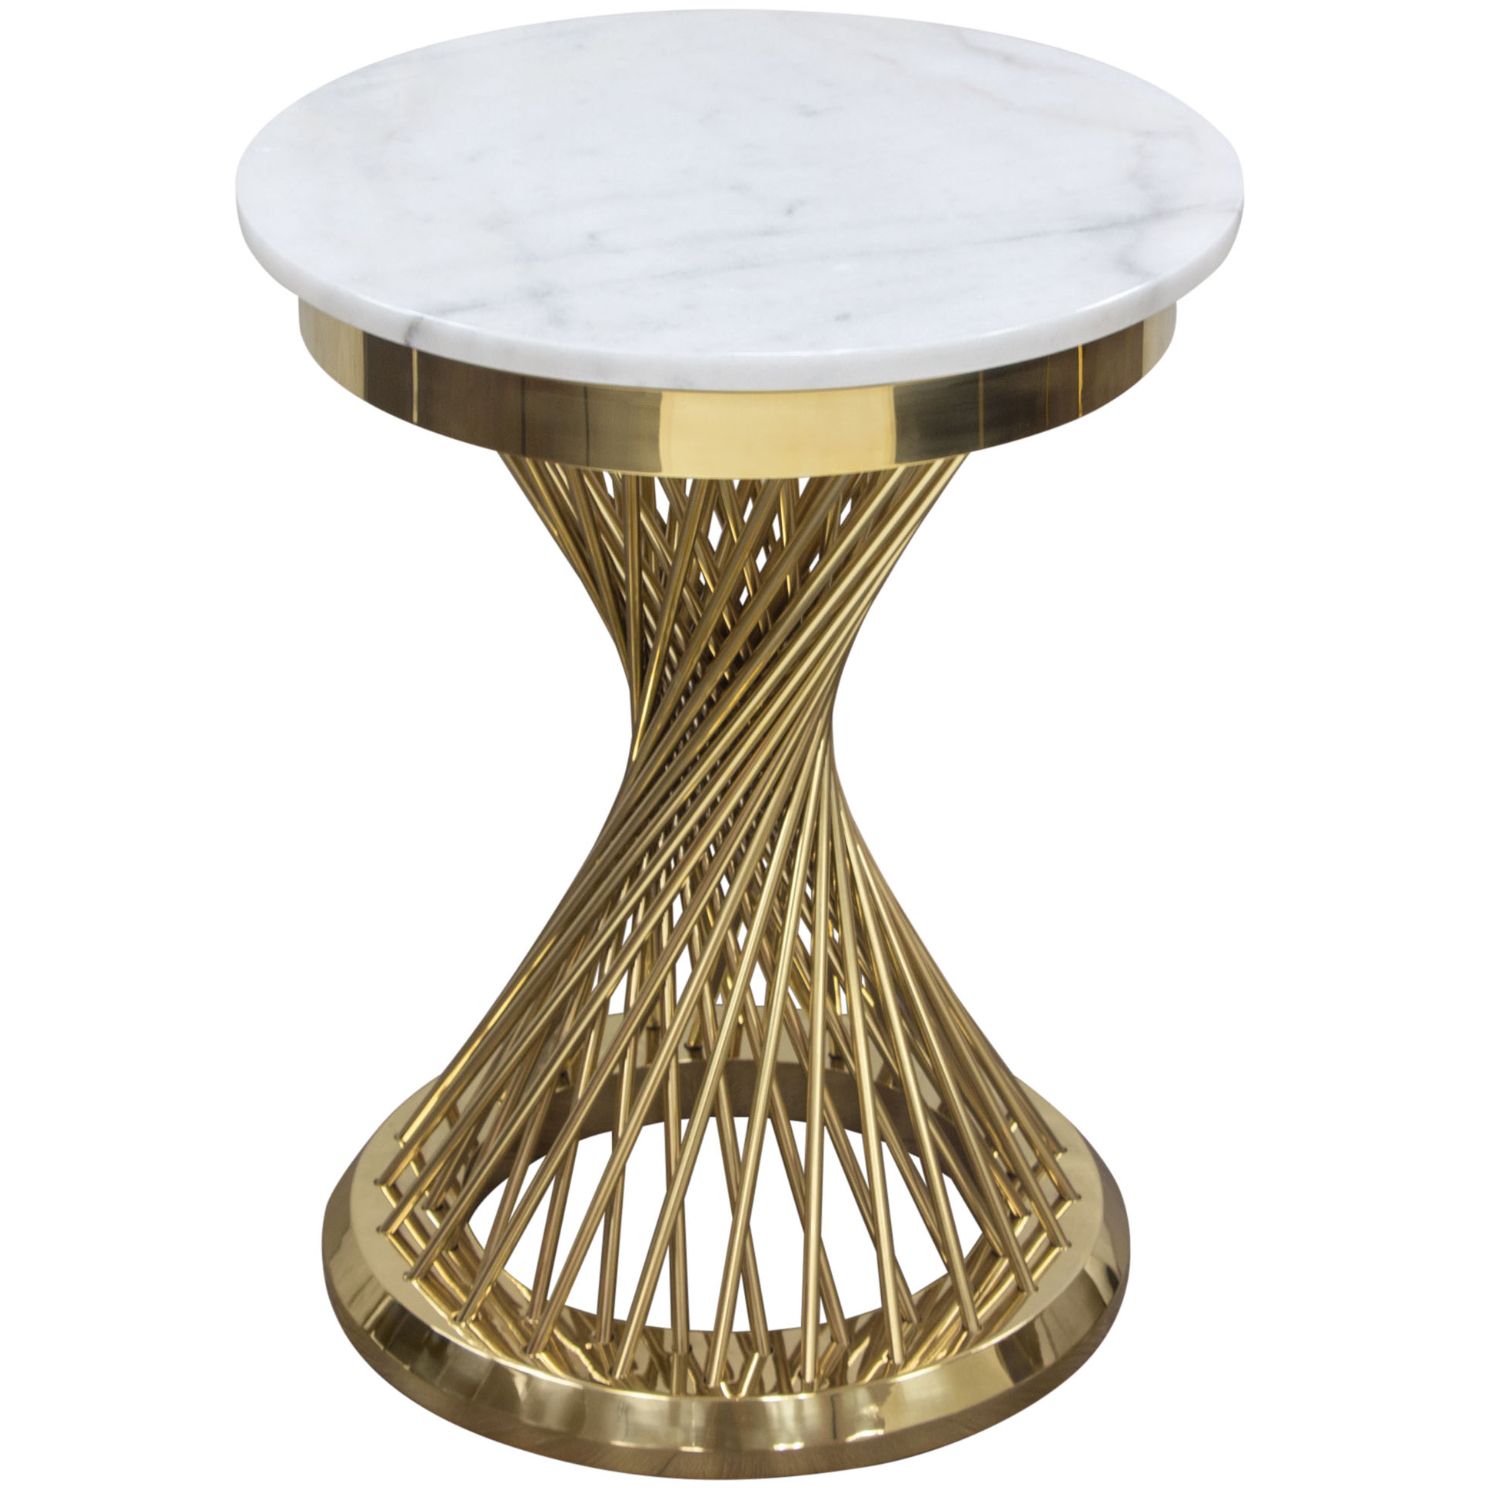 Diamond Sofa Solsticeetgd Solstice 18" Round End Table In Marble On Regarding Square Black And Brushed Gold Console Tables (View 10 of 20)